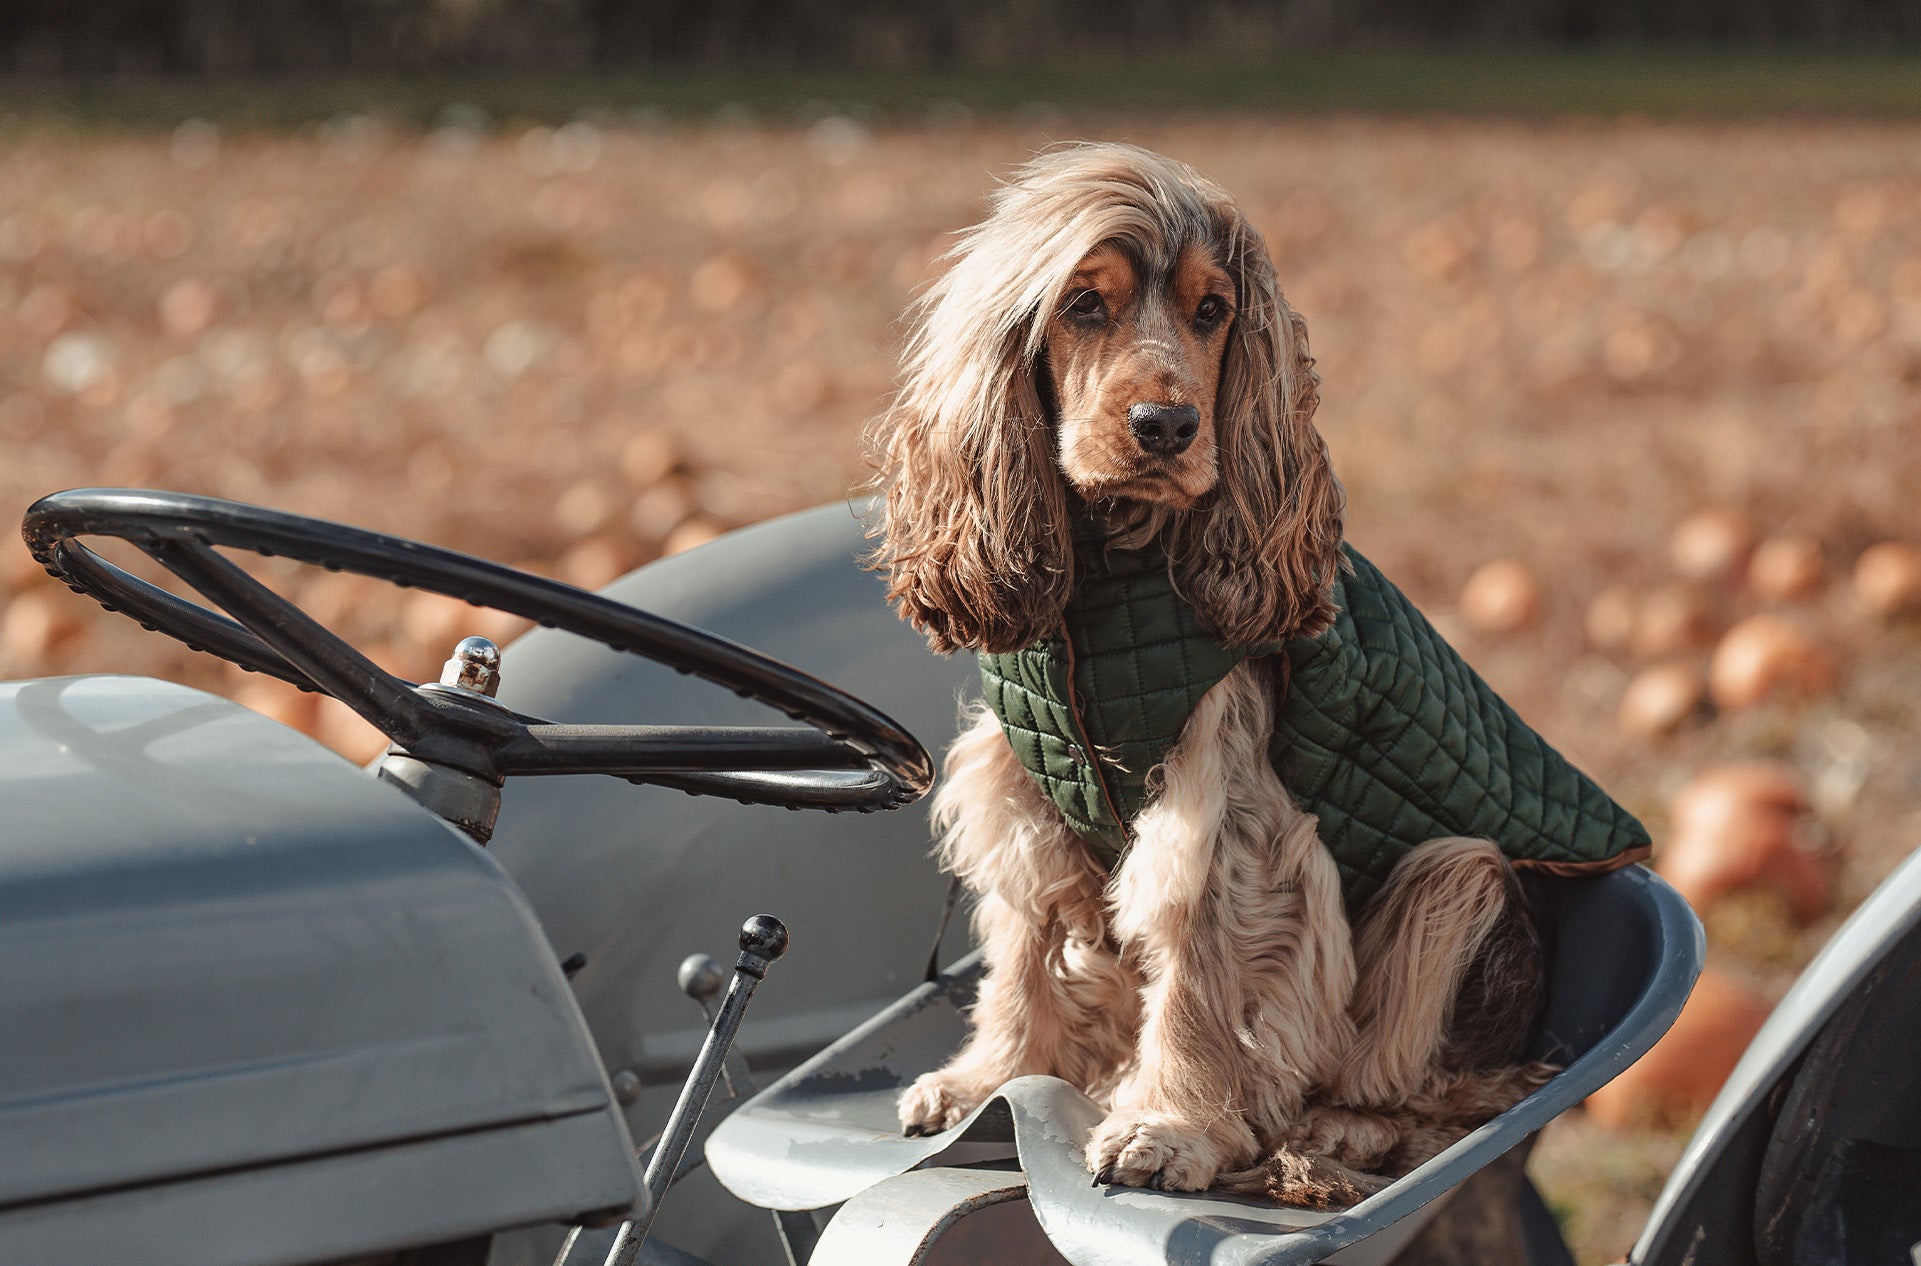 A dog posing outside on a tractor with an Over Glam coat